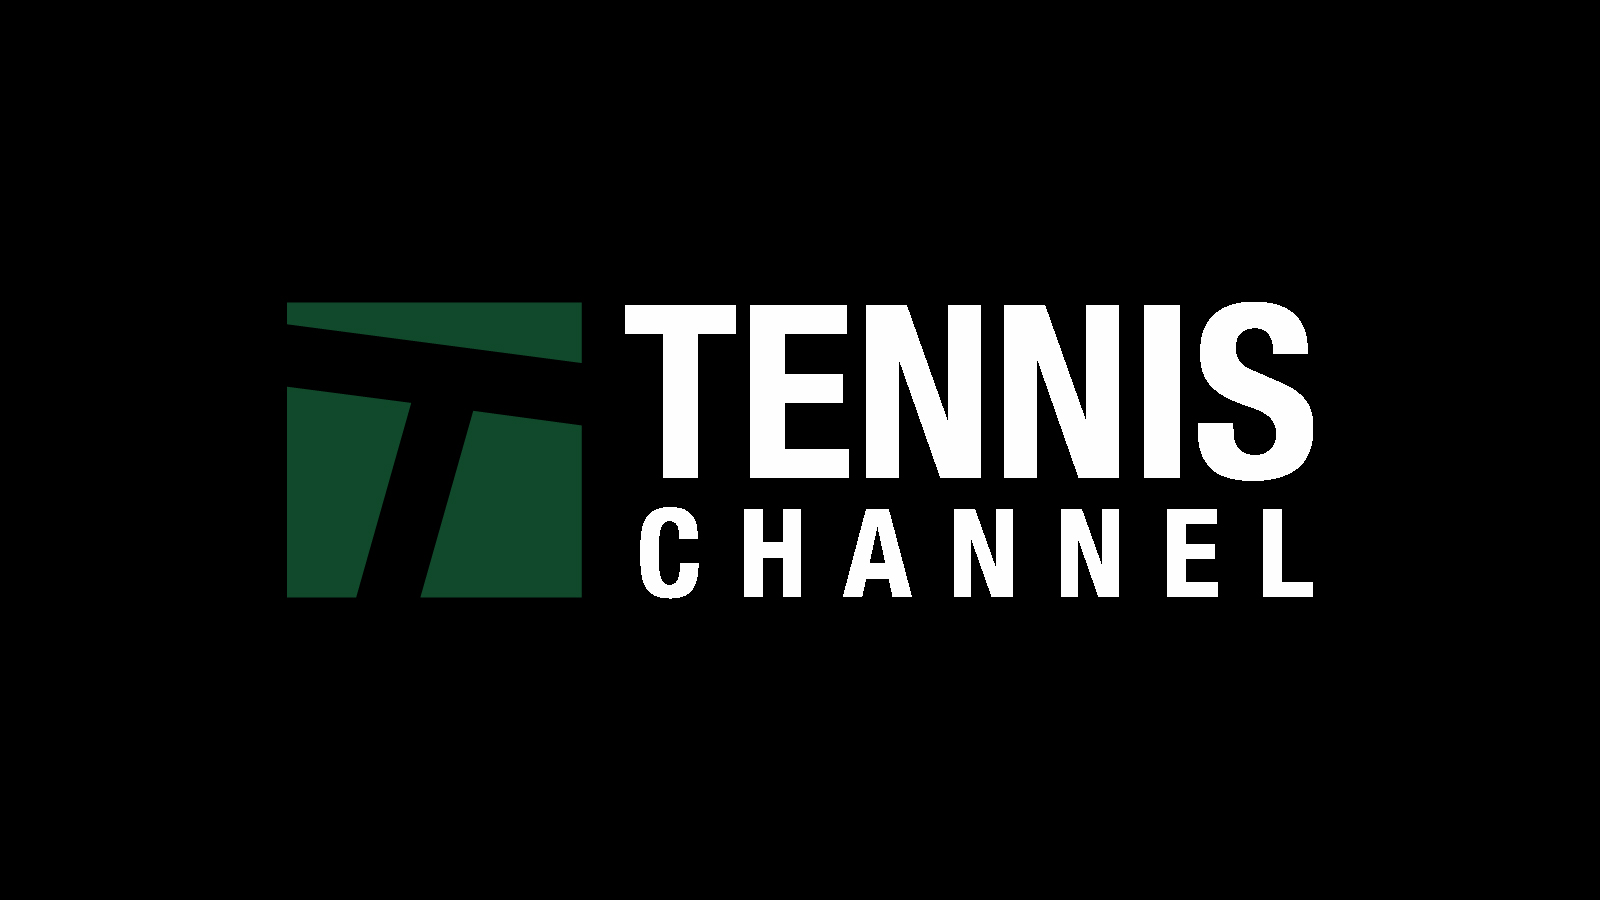 How to Activate Tennis channel on Roku, Fire TV, Ps4, PS5, Xbox, Samsung TV, Apple TV DubaExpress